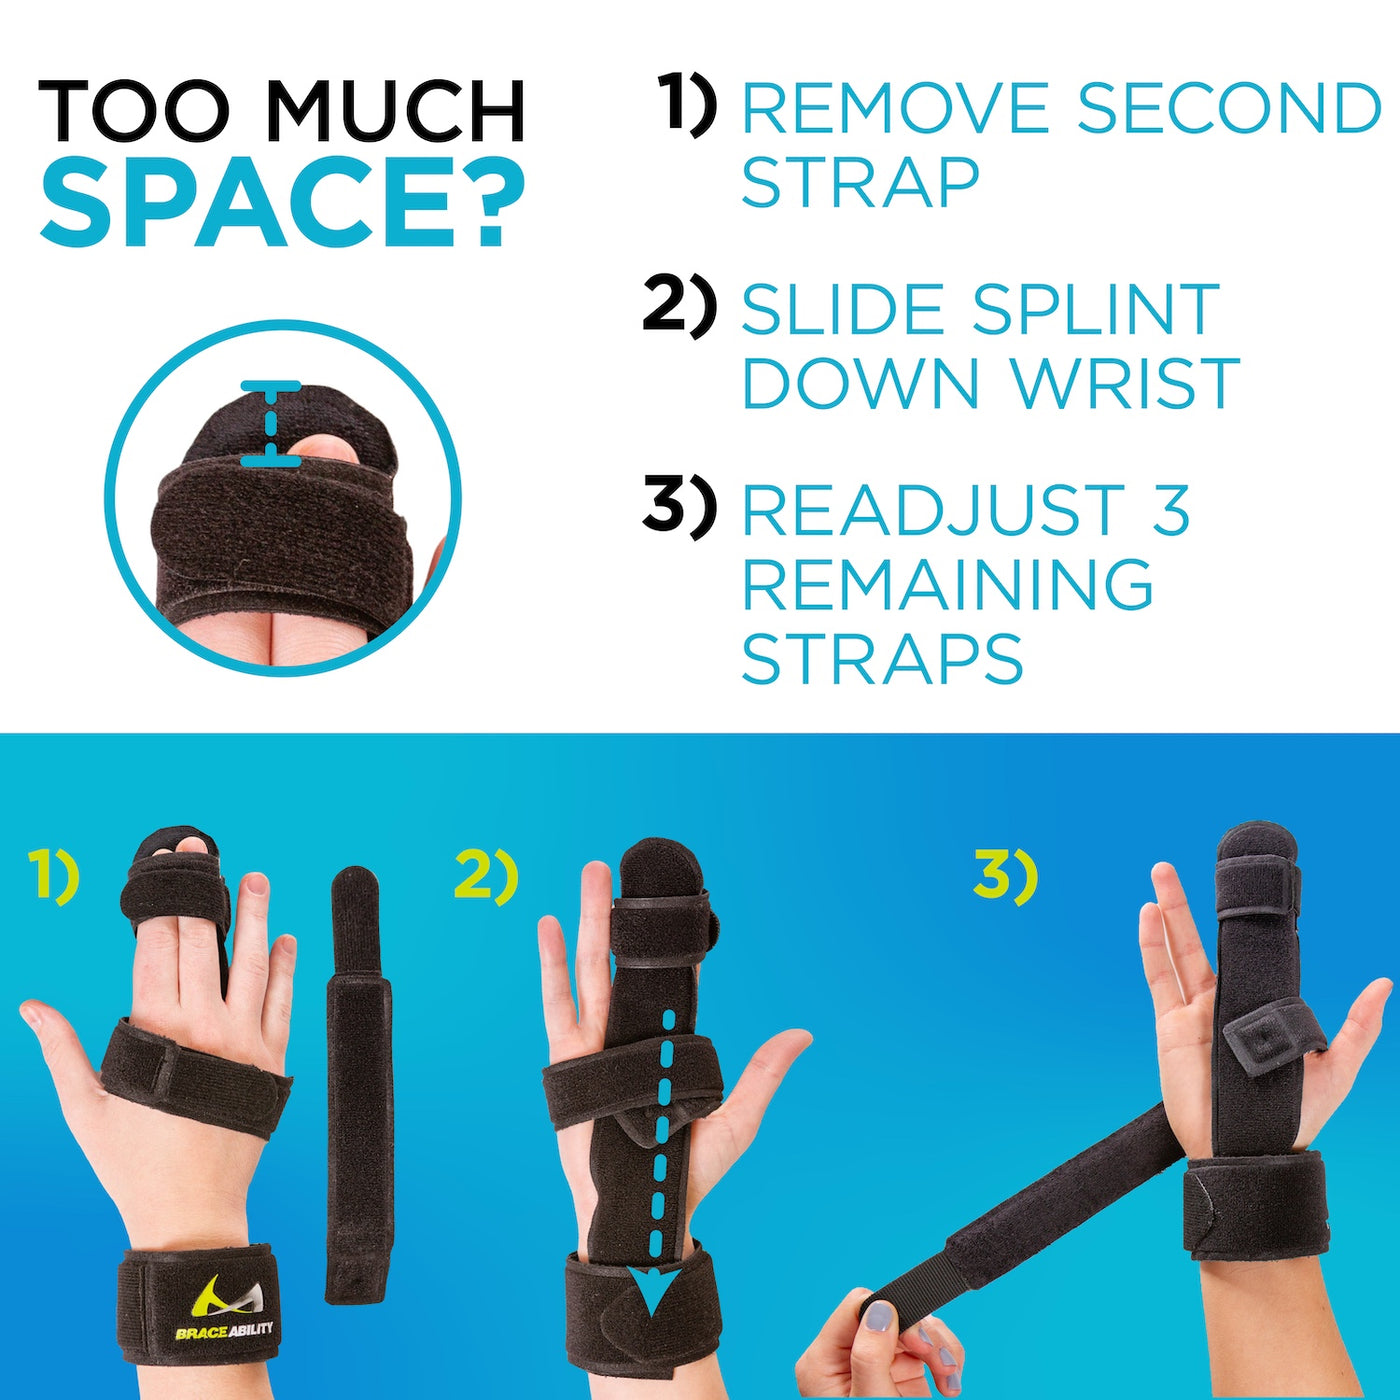 The index finger splint is very universal, if you feel brace is too long, slide the brace down hand